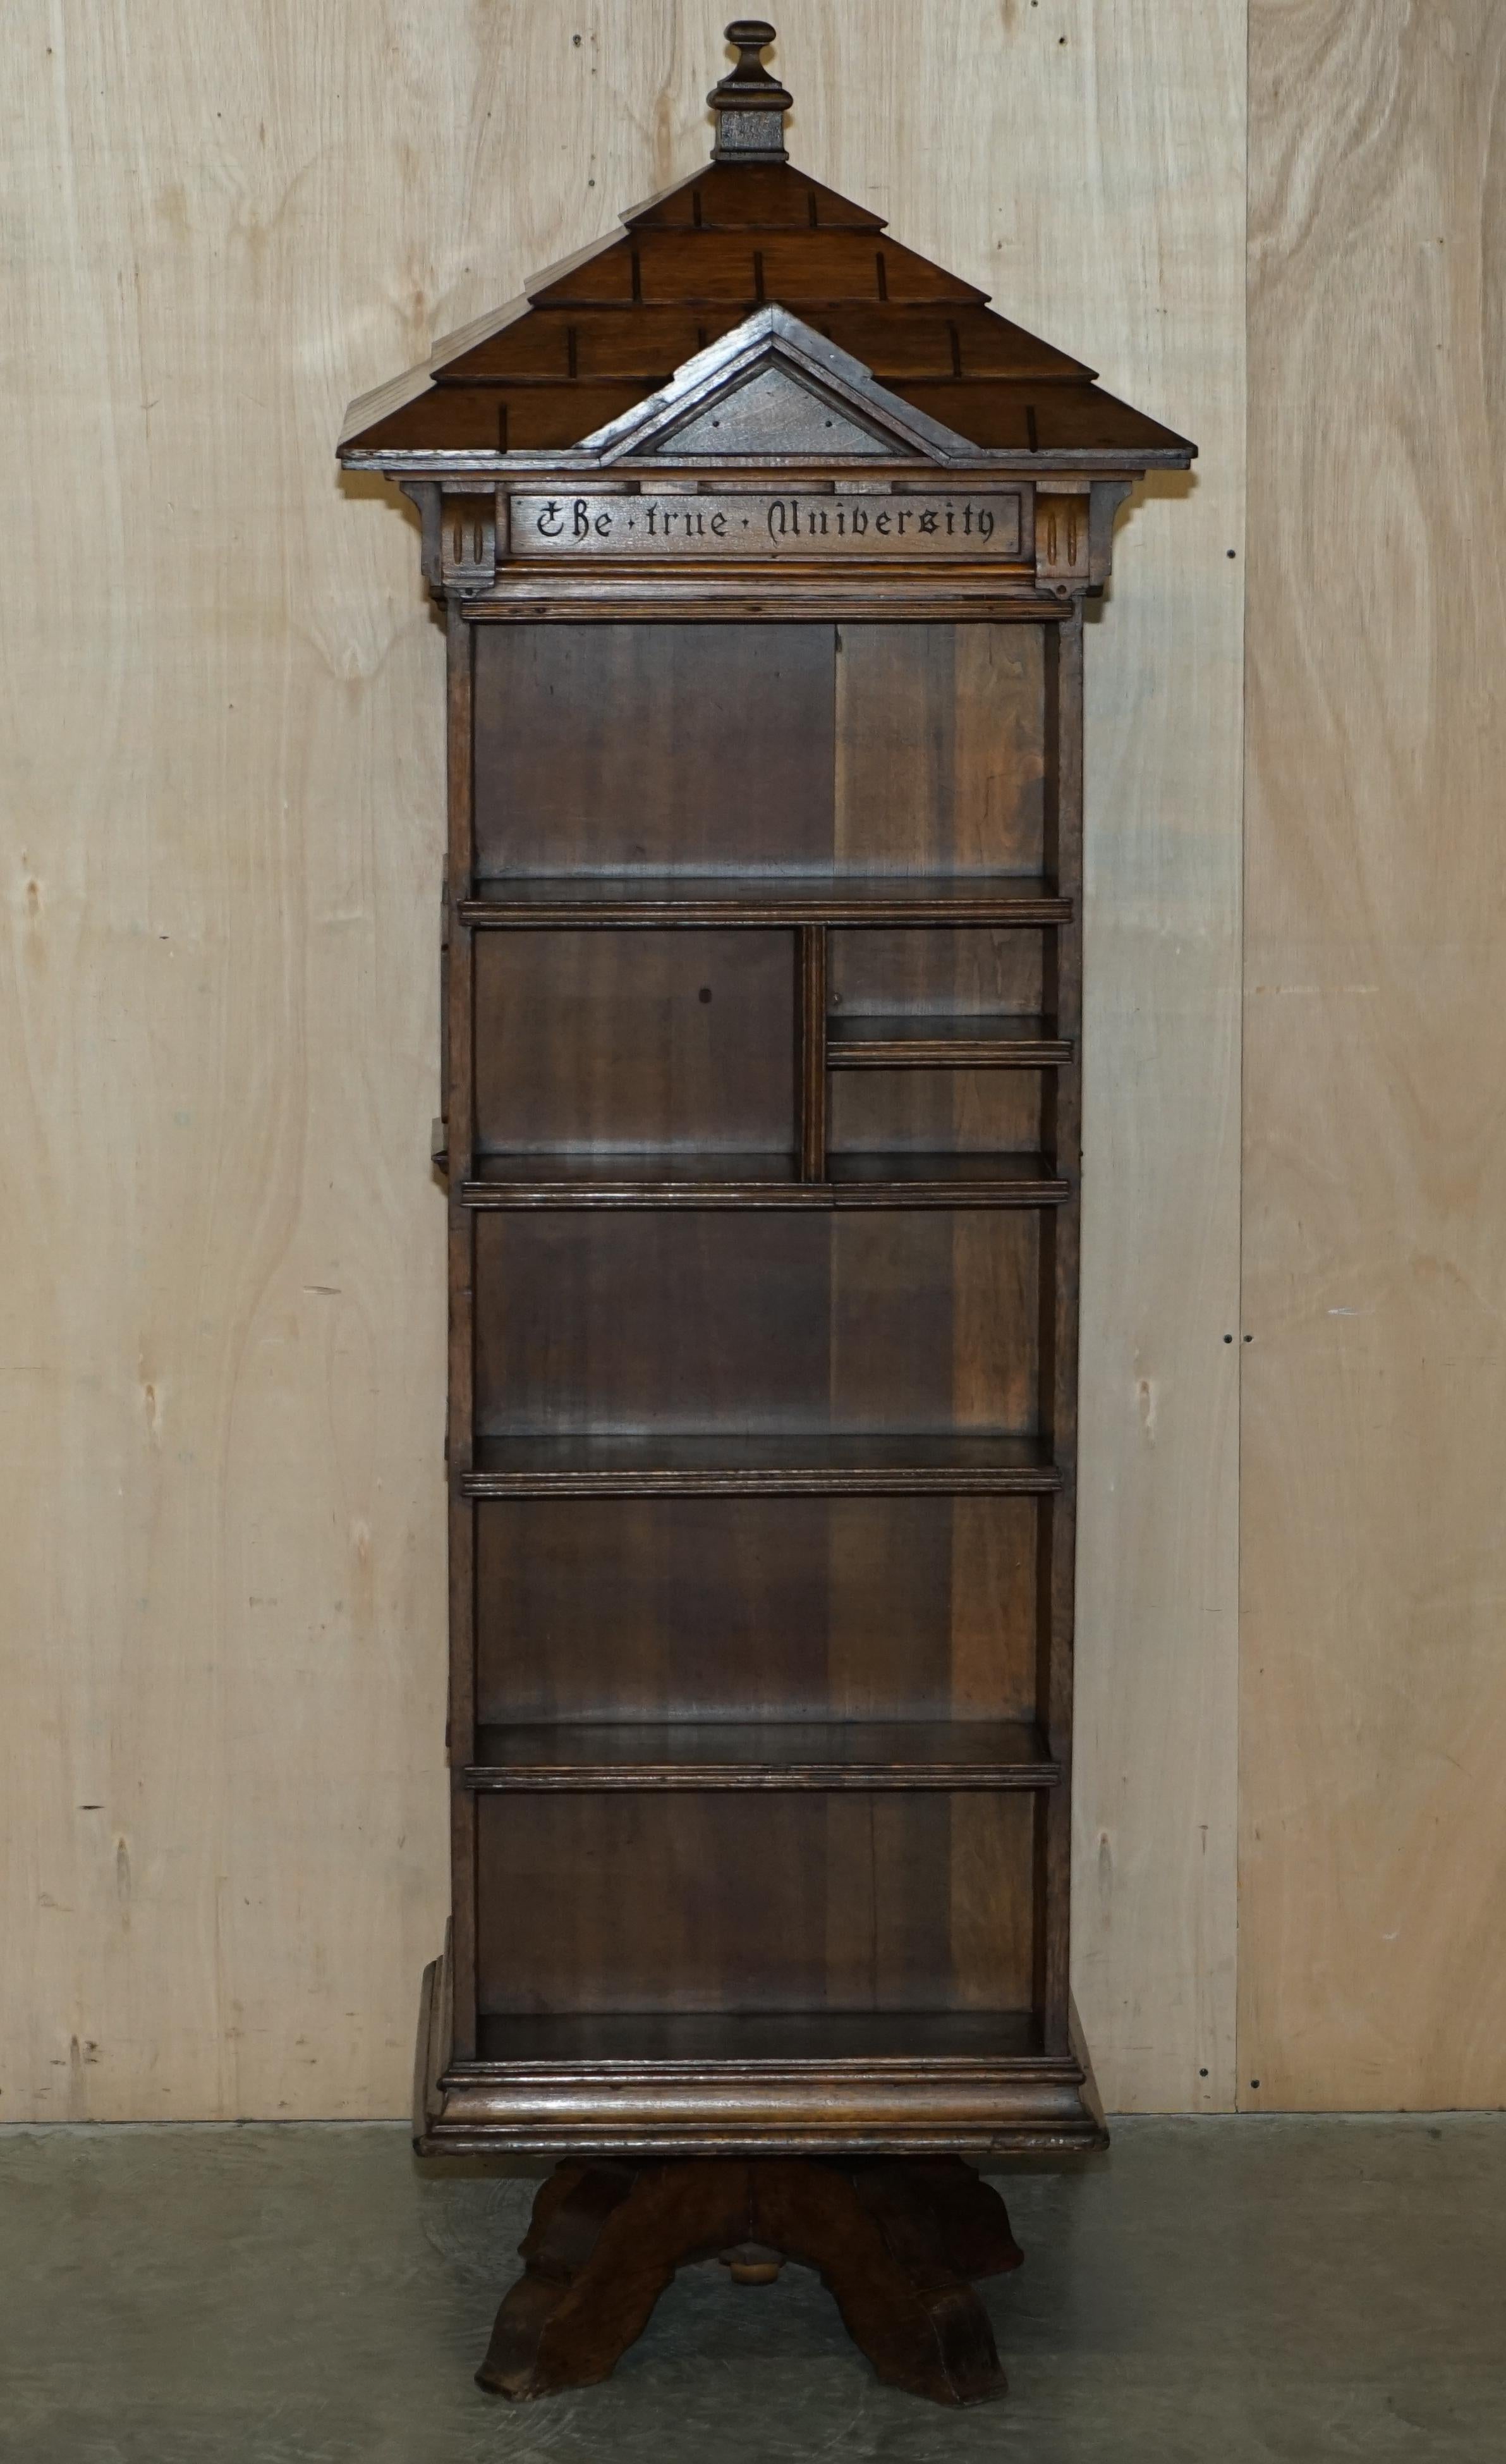 We are is delighted to offer for sale this super rare, highly collectable, Antique Victorian, Seymour Easton 1859-1916 Tabard Inn Revolving bookcase stand.

This is pretty much the finest and most collectable revolving bookcase in the world, its